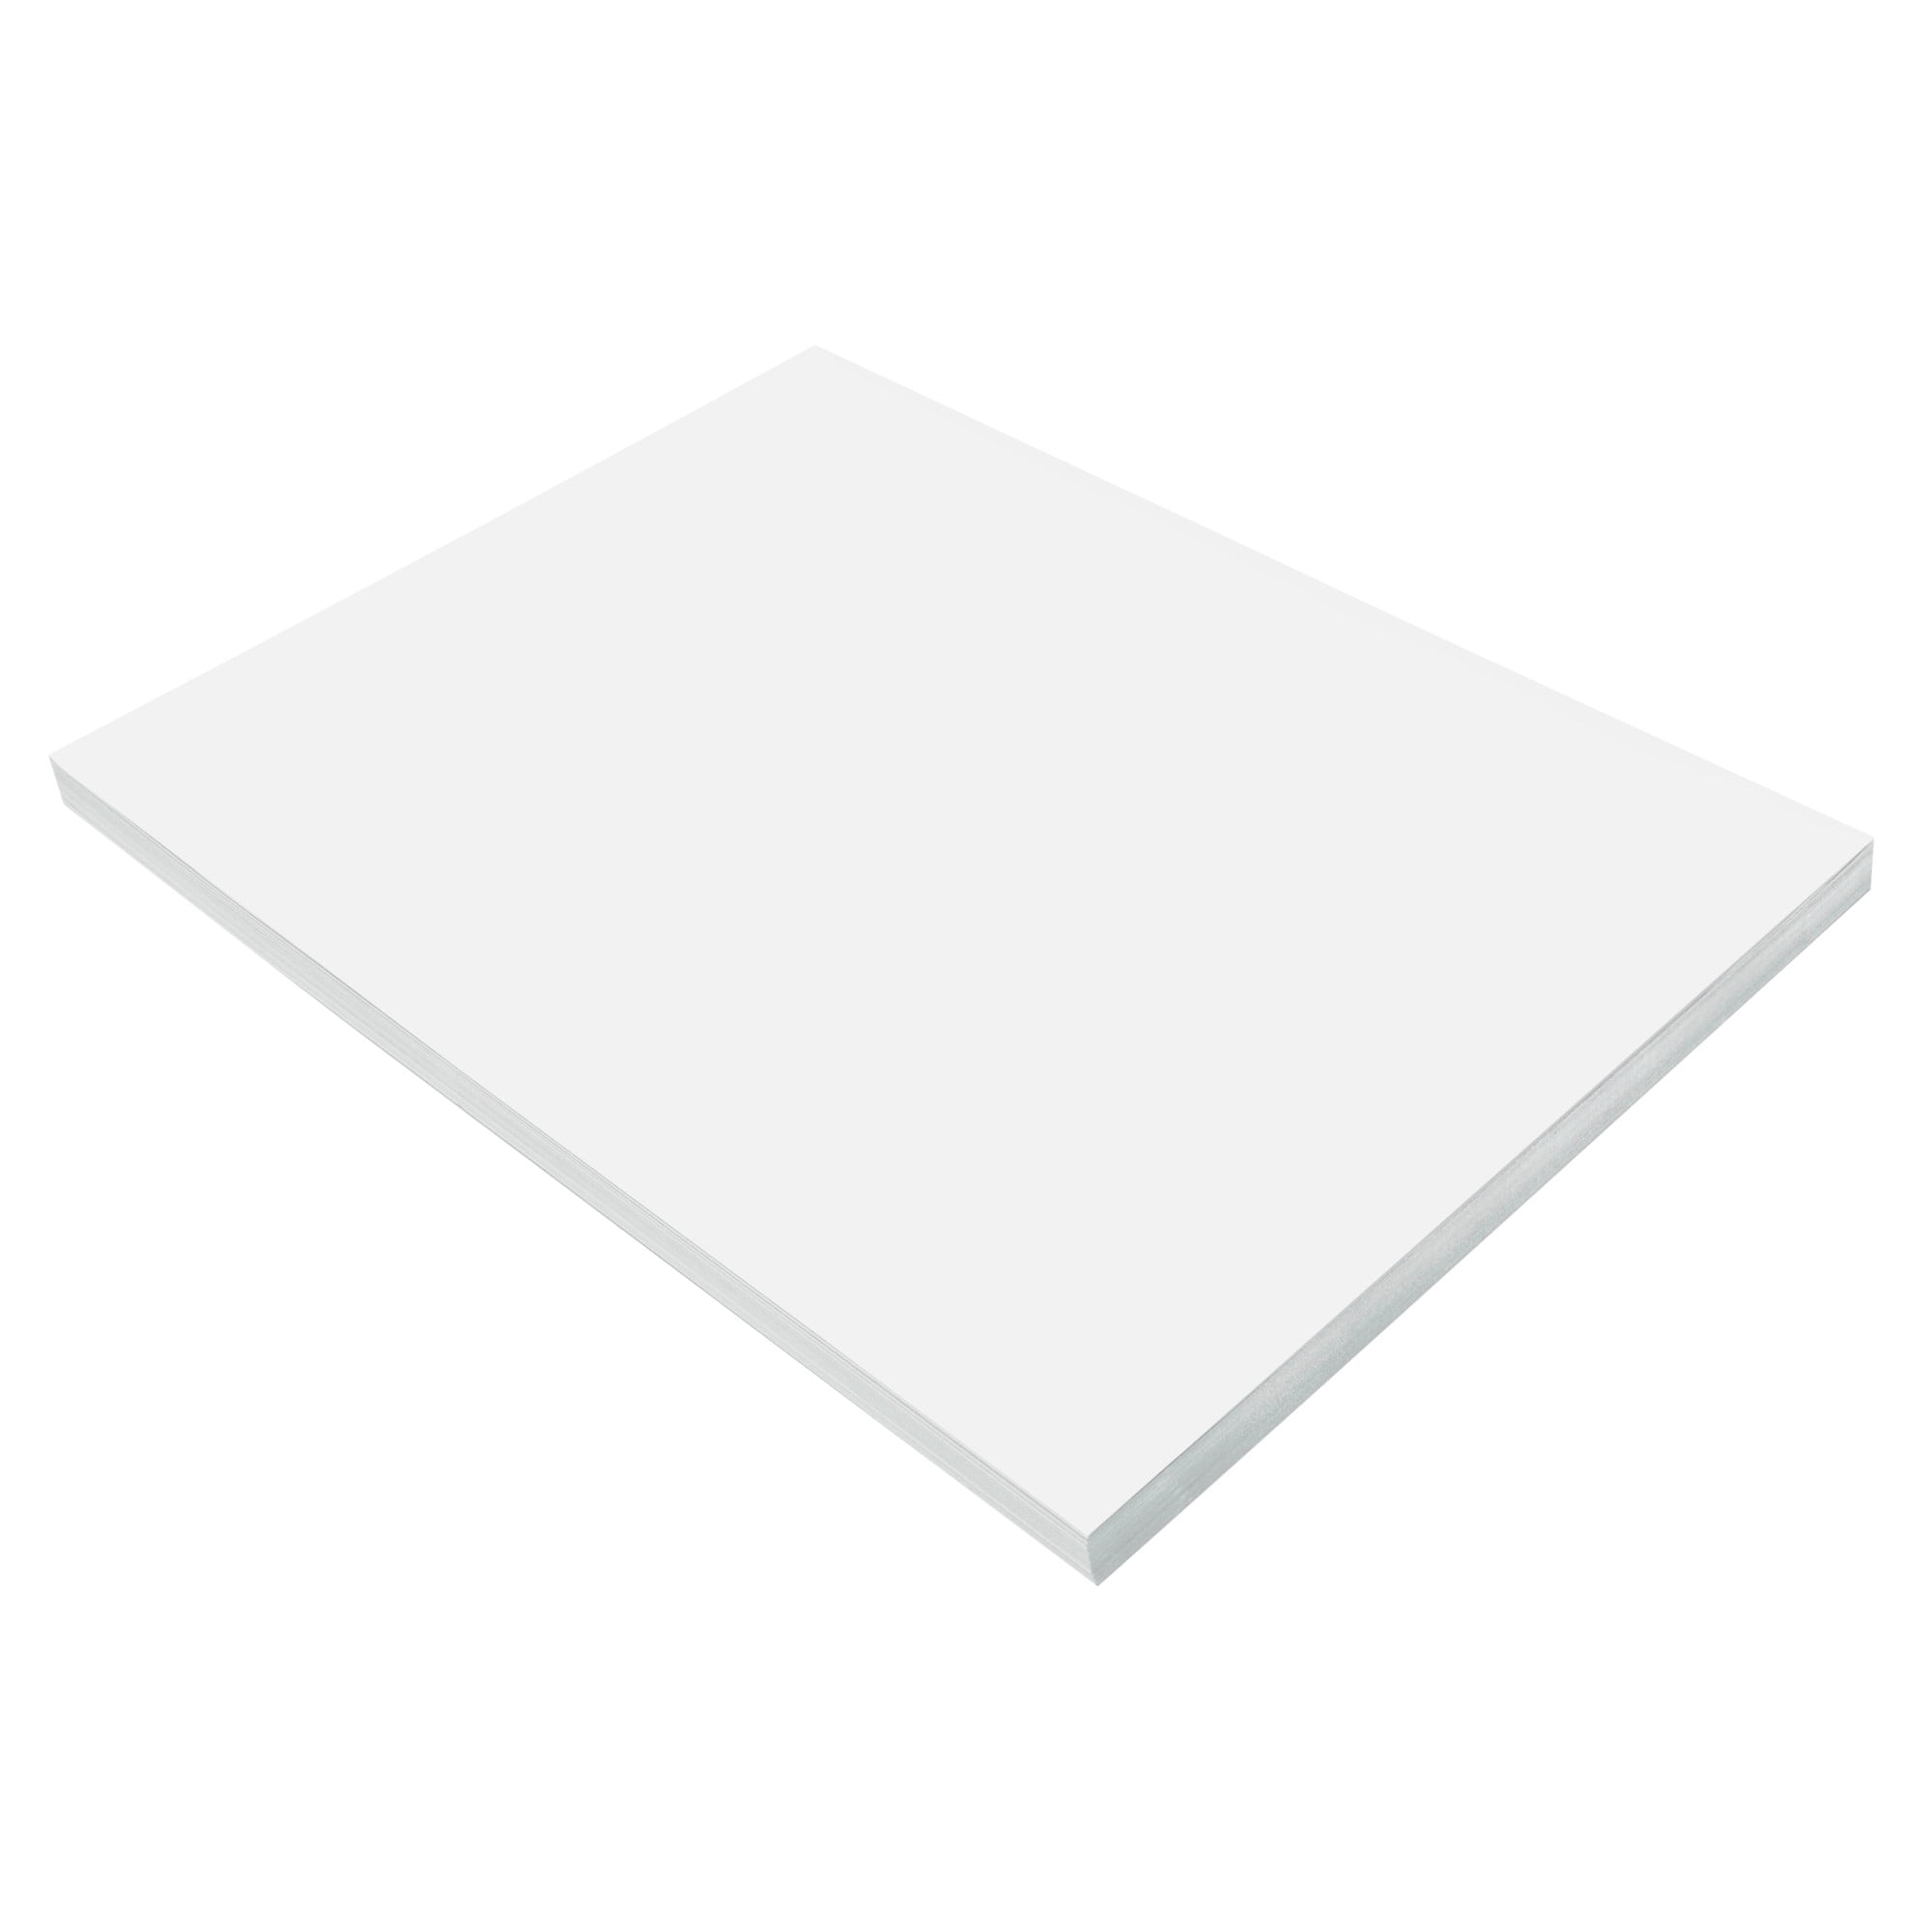 Prang Medium Weight Construction Paper, 9 x 12 Inches, White, 50 Sheets